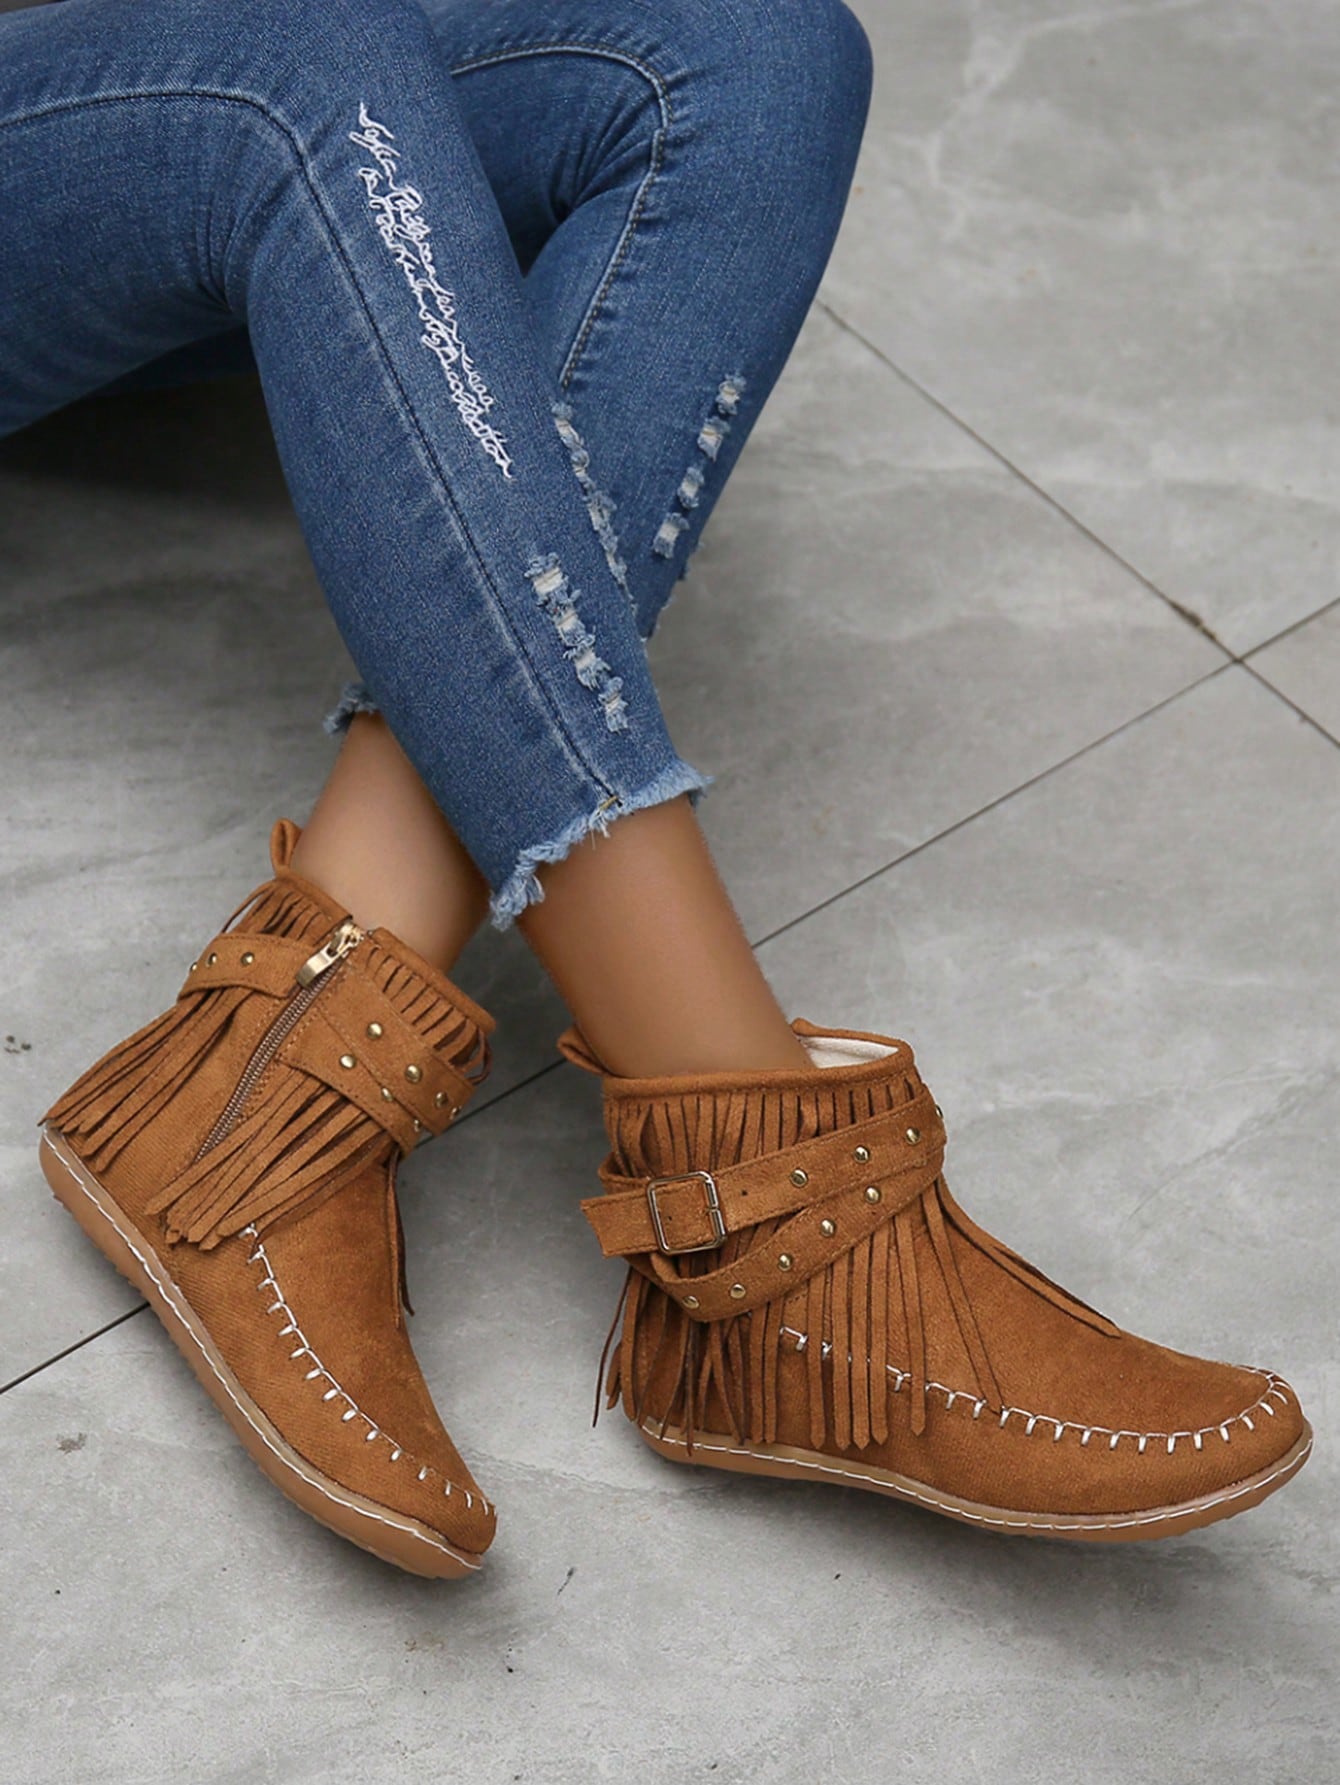 Happy Hippie Boots Single Layer Fringe Short Boots With Zipper Closure Buckle Studs Design Pu Leather